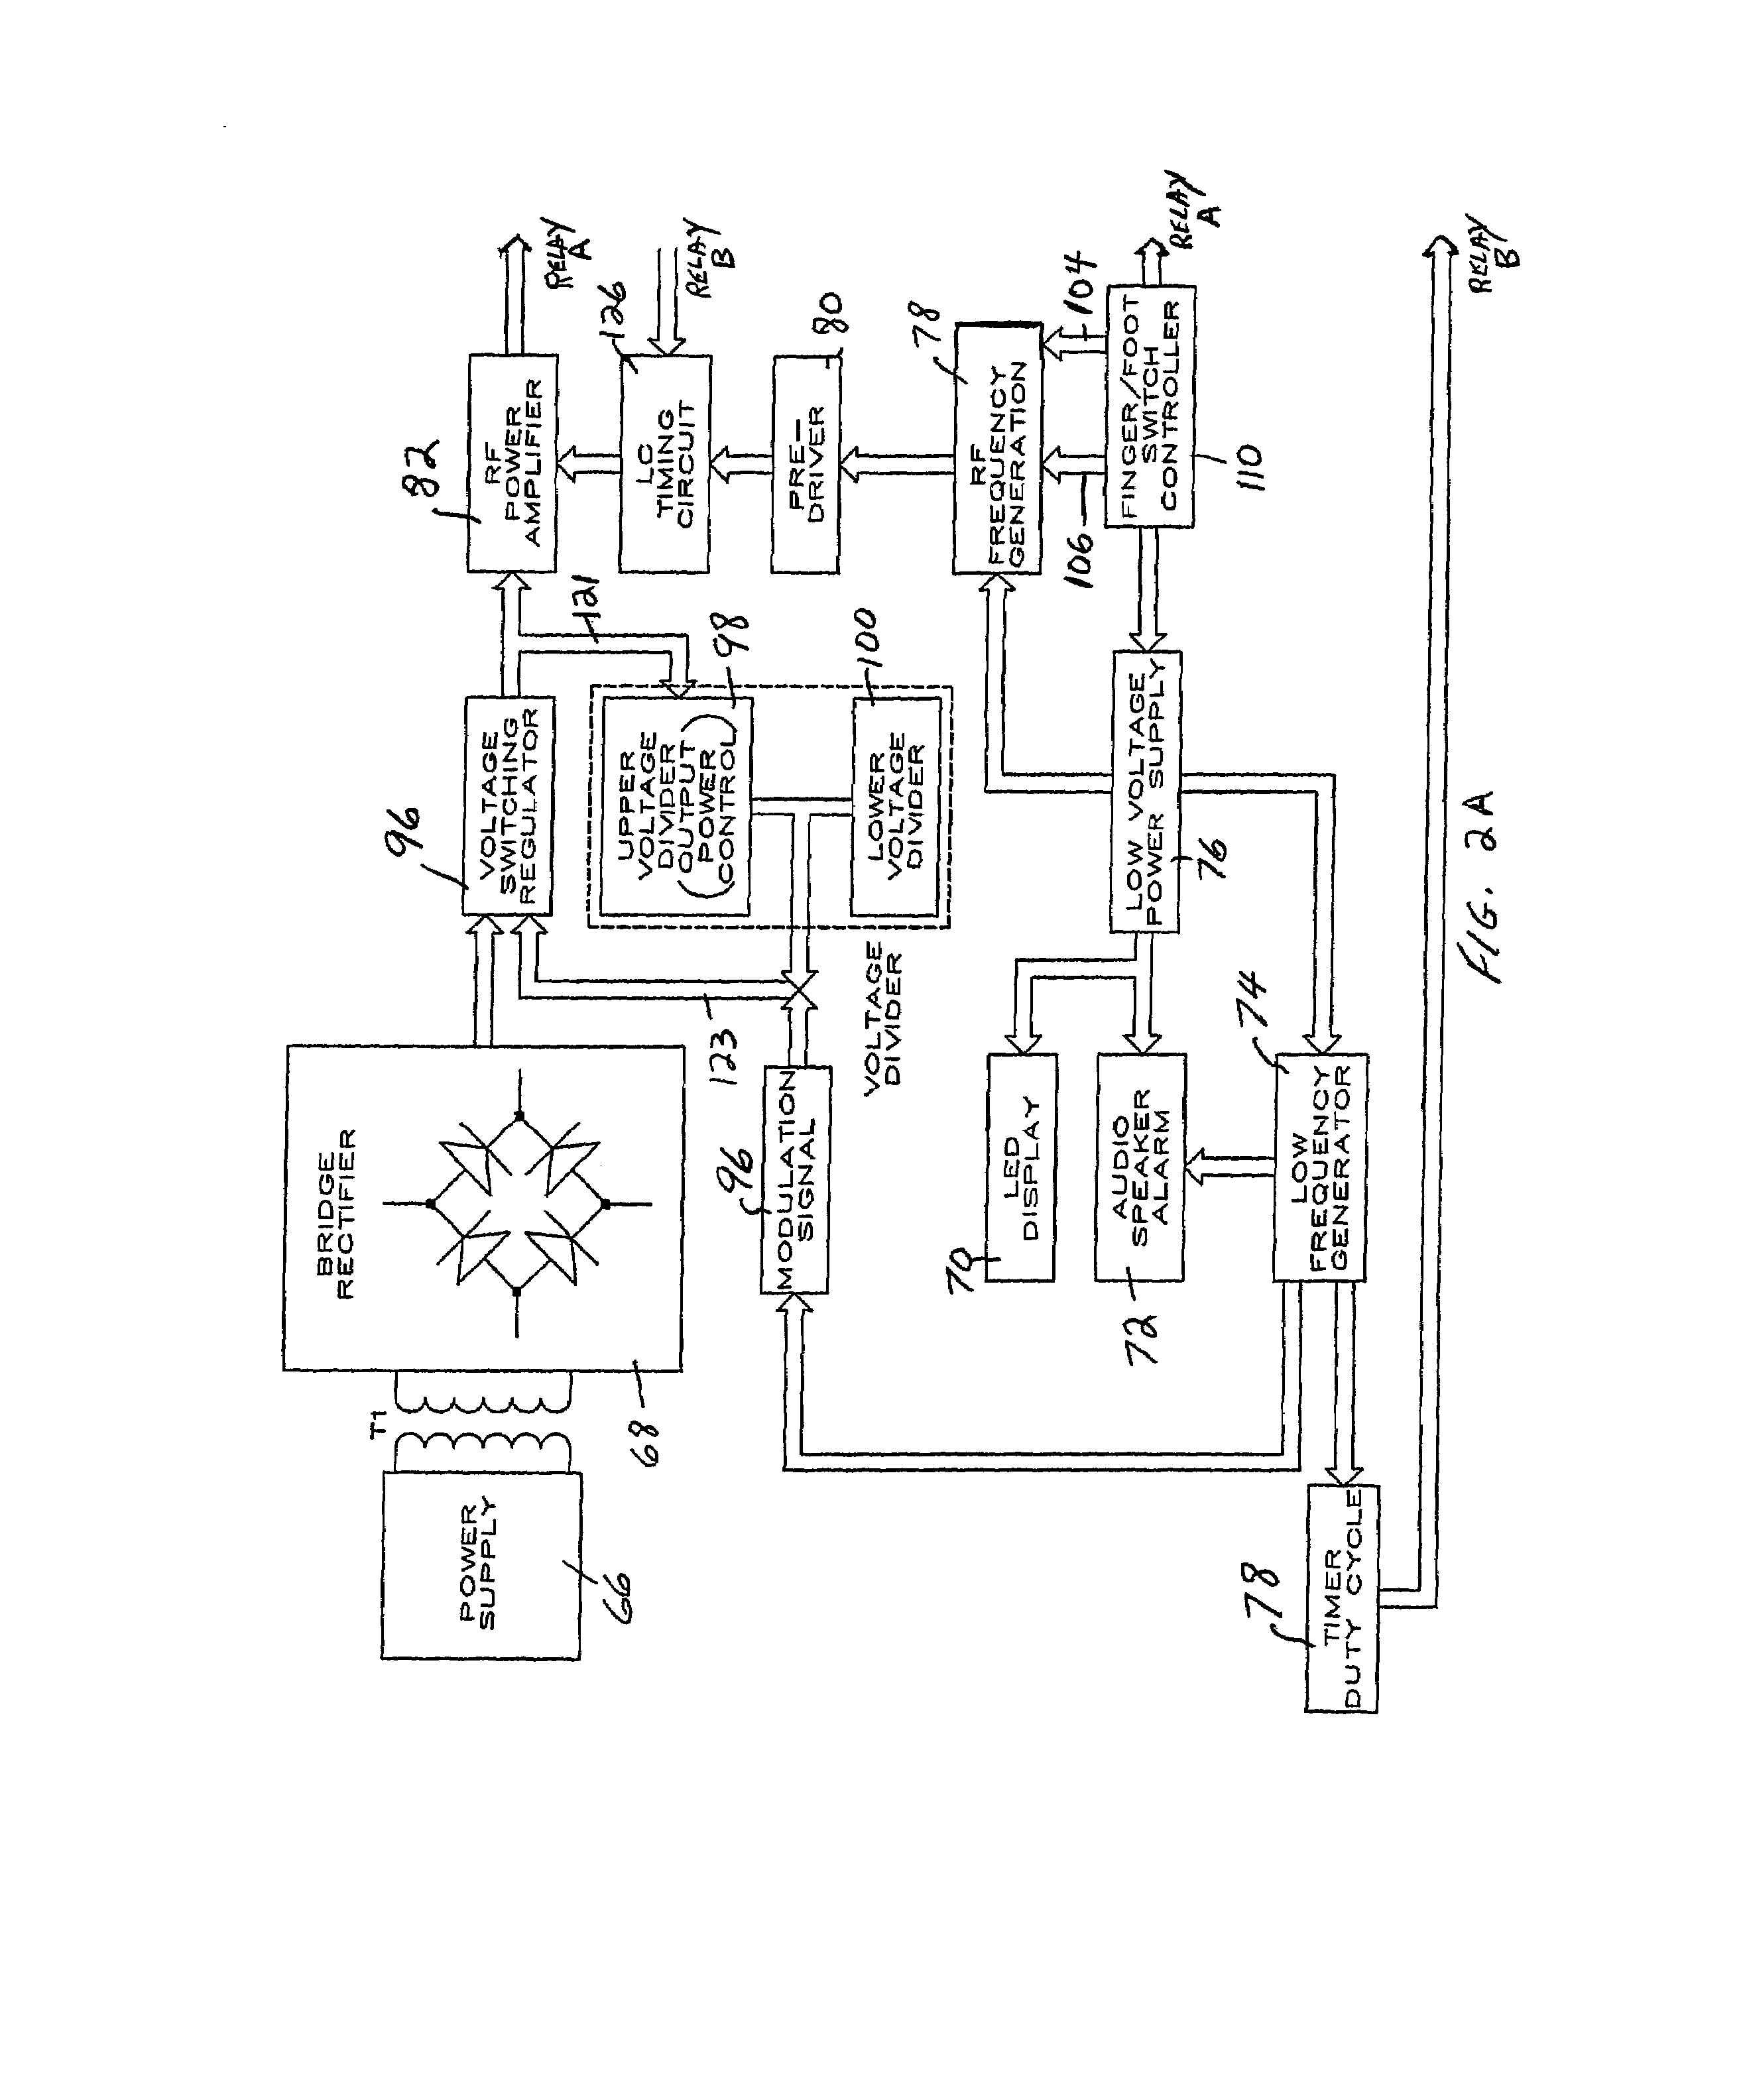 Dual-mode electrosurgical instrument